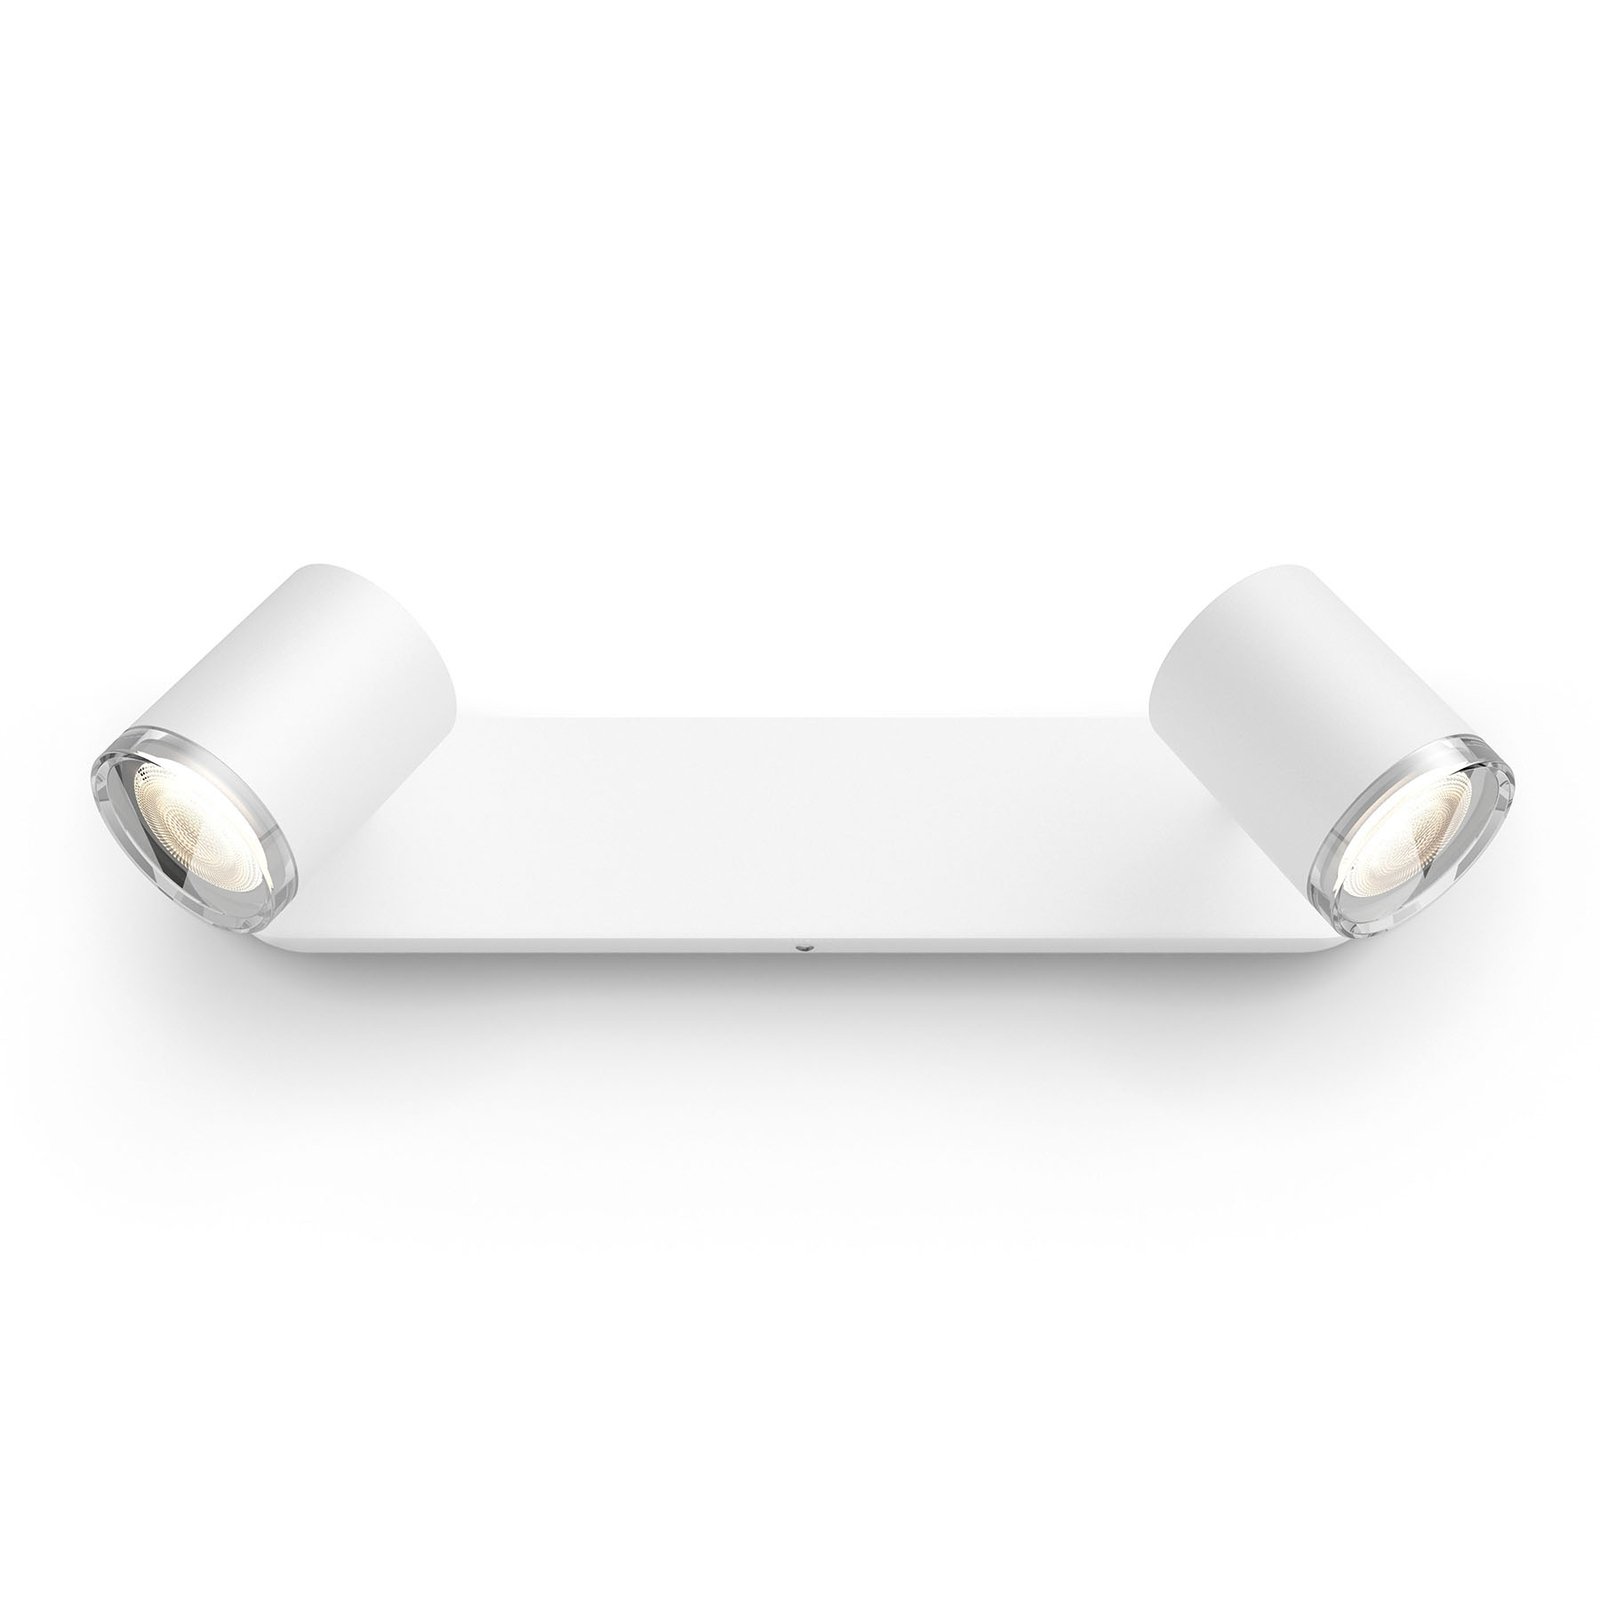 Philips Hue White Ambiance Adore foco LED, 2 focos